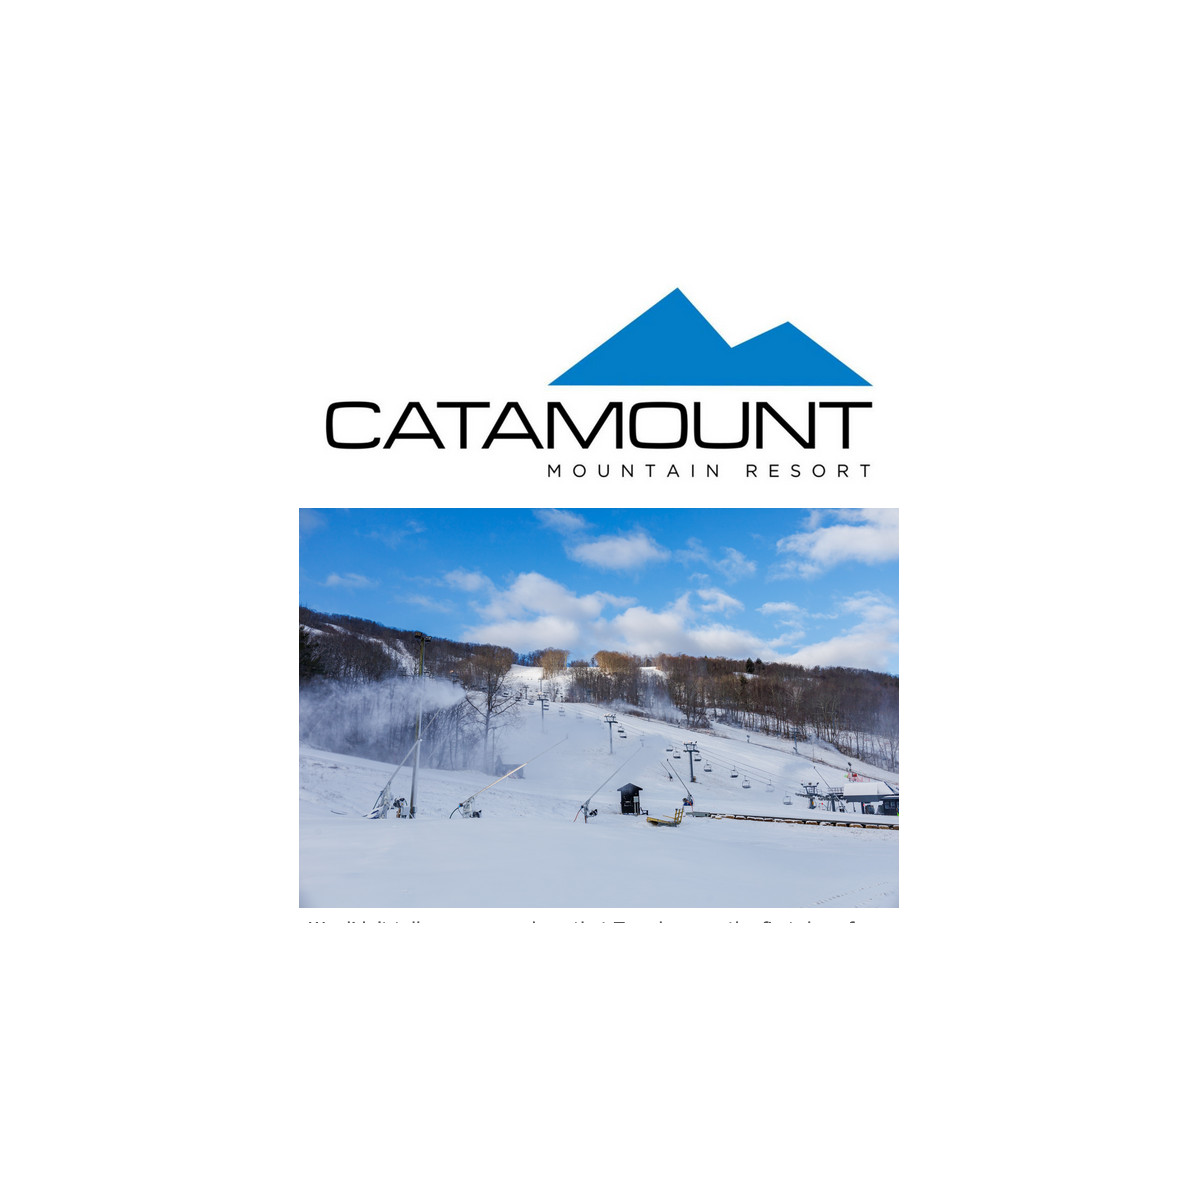 Catamount Making Snow On March 21st